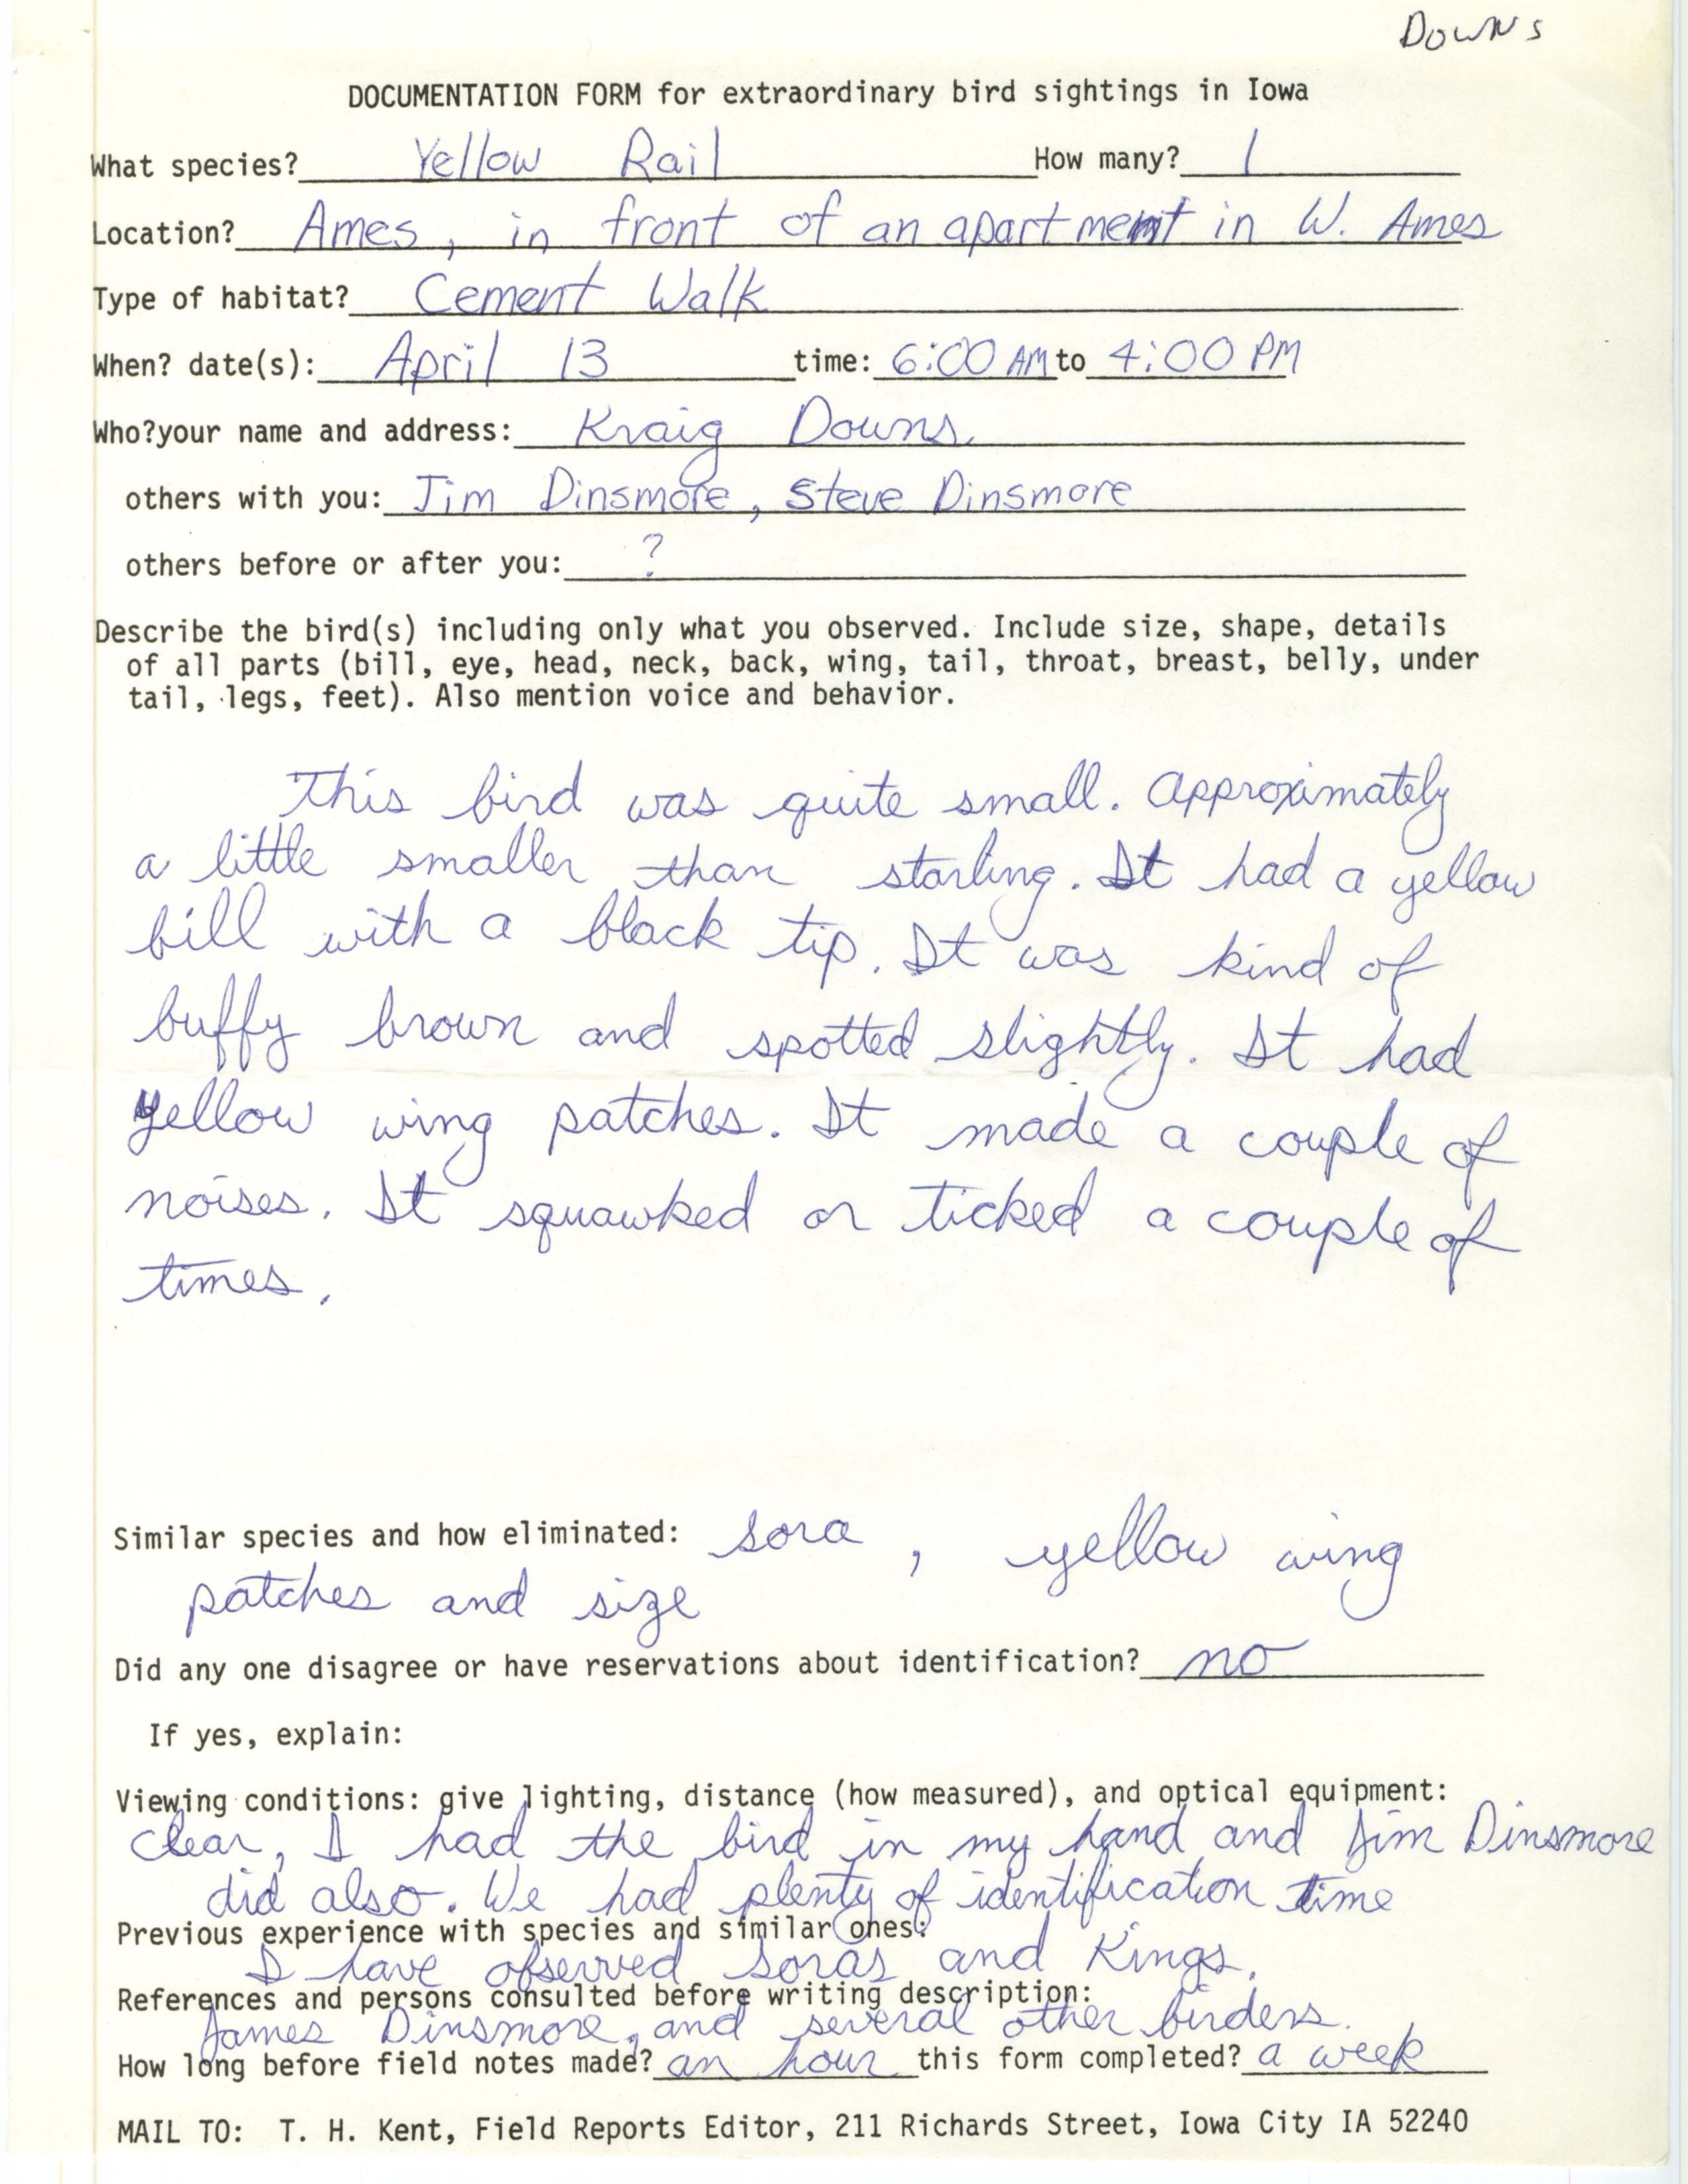 Rare bird documentation form for Yellow Rail at Ames in 1983